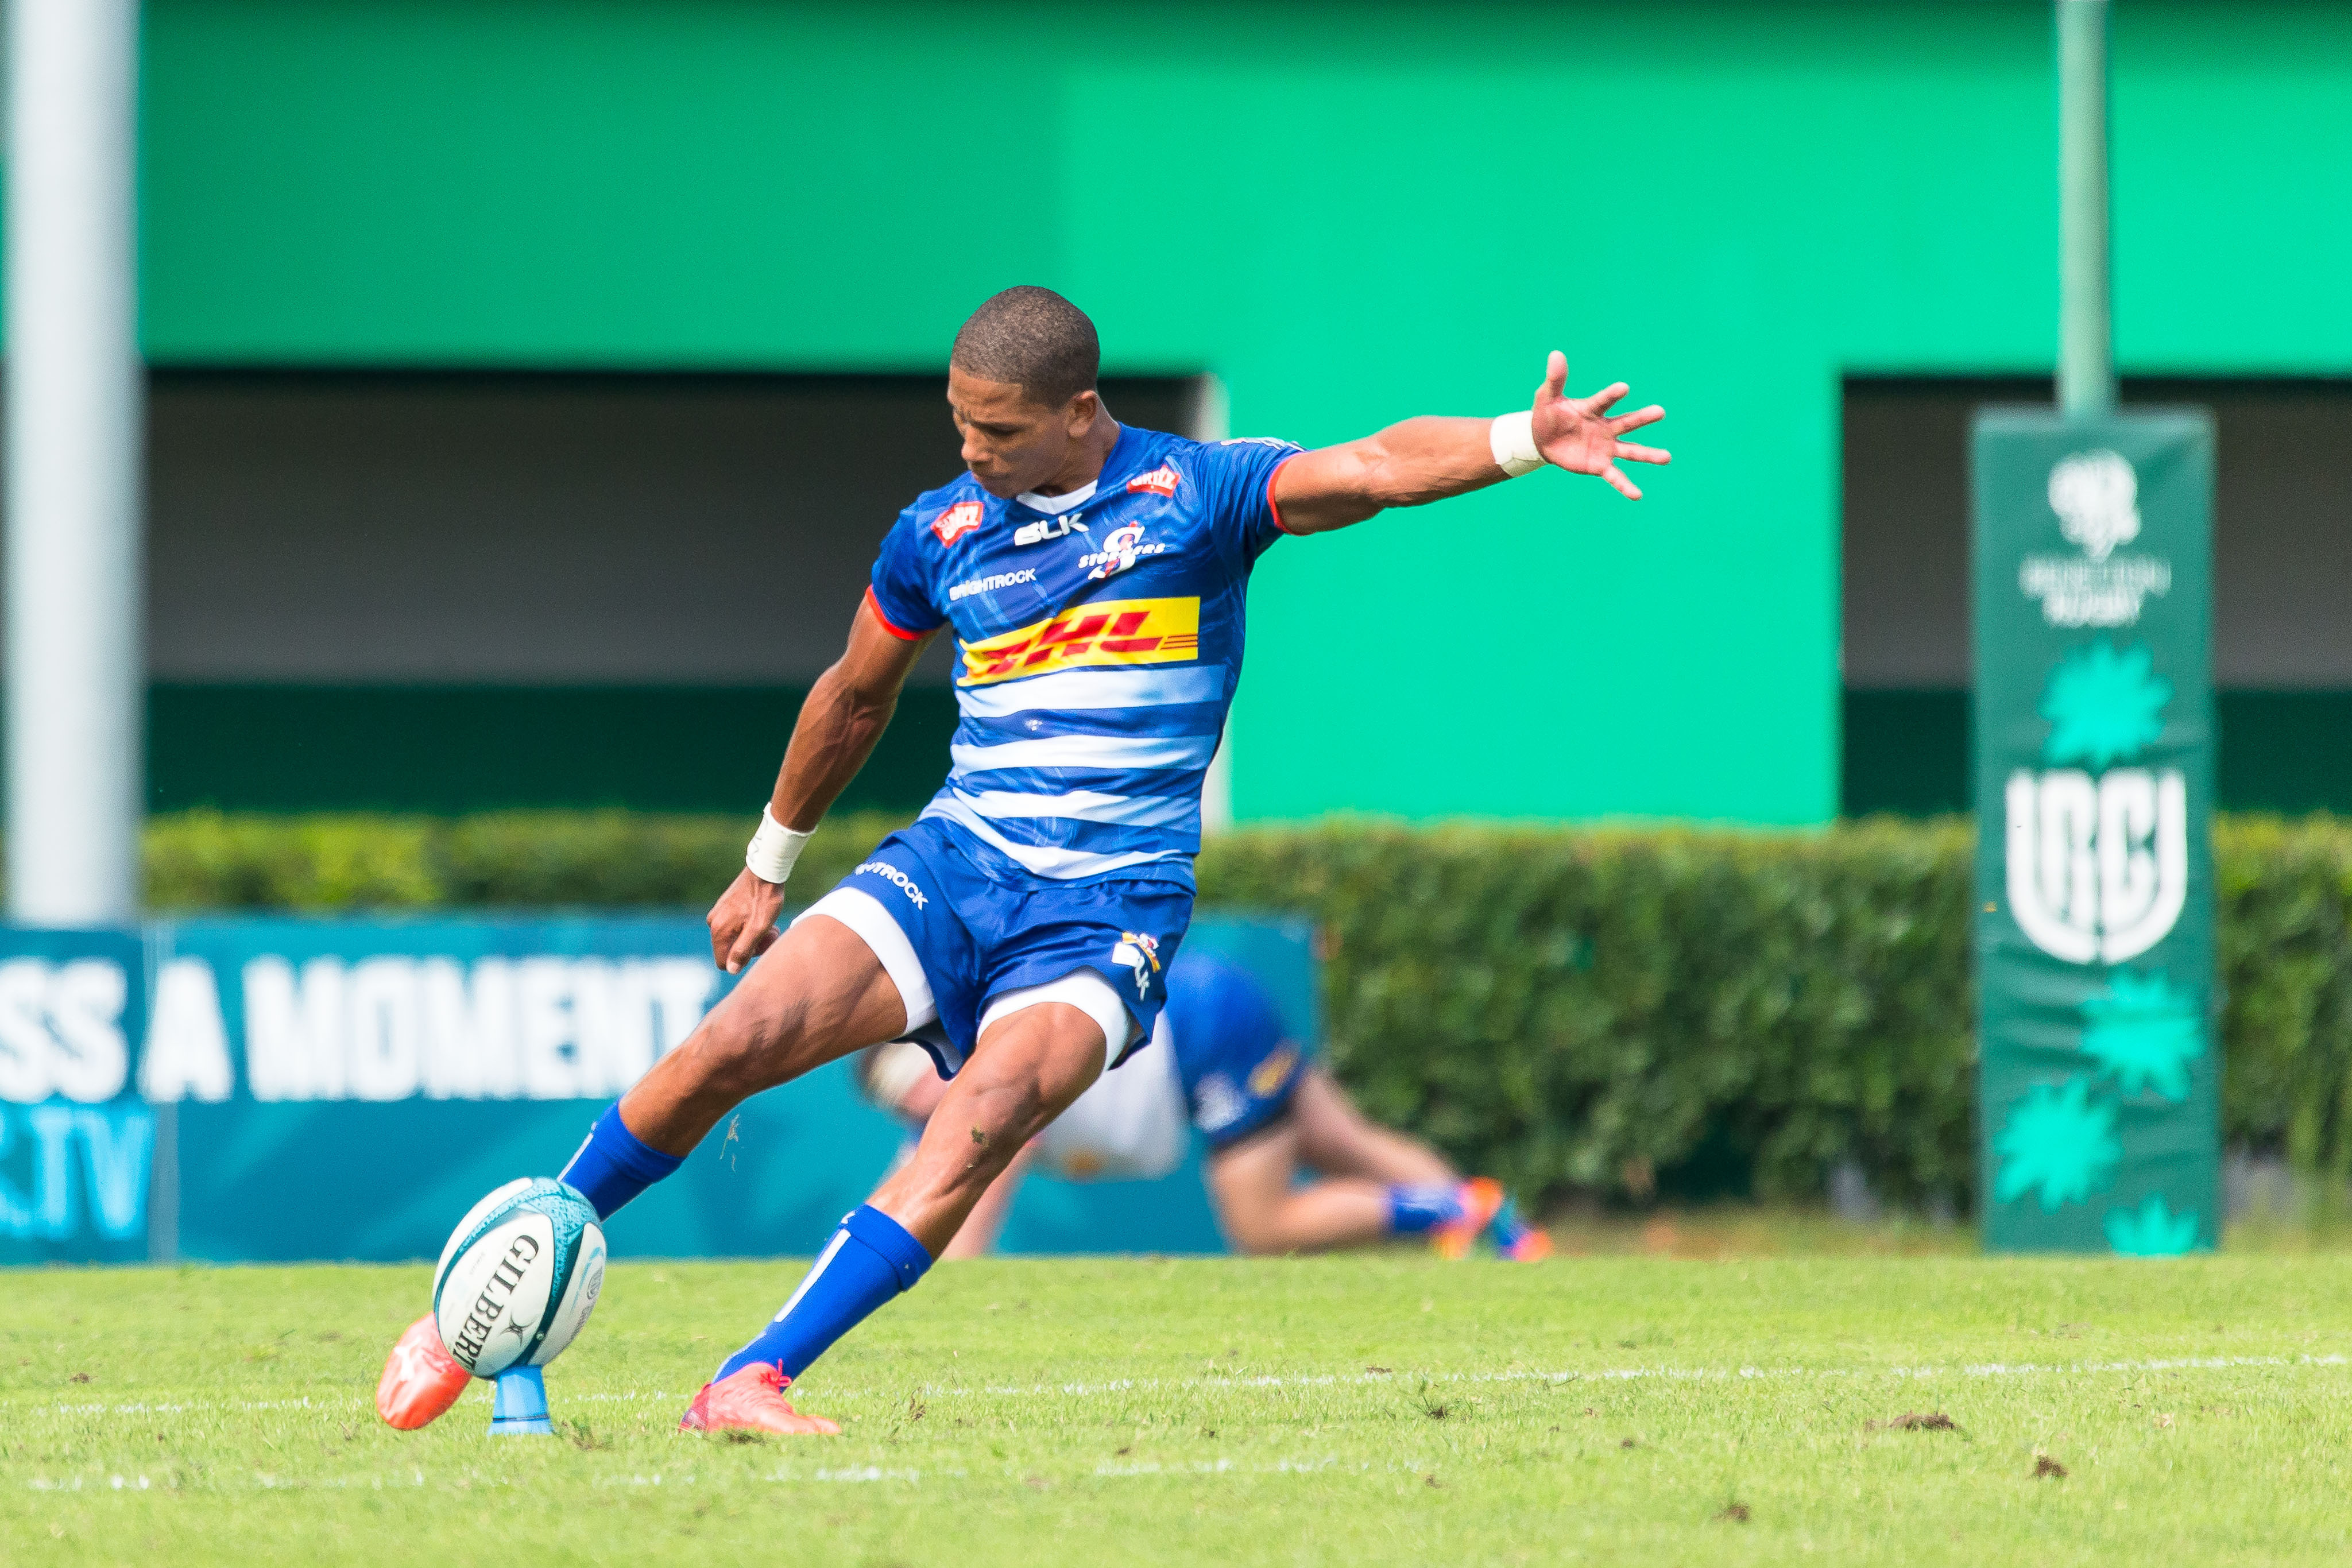 Mandatory Credit: Photo by ≈≈≈ (12465618f) Manie Libbok (DHL Stormers) United Rugby Championship match Benetton Rugby vs DHL Stormers, Treviso, Italy - 25 Sep 2021